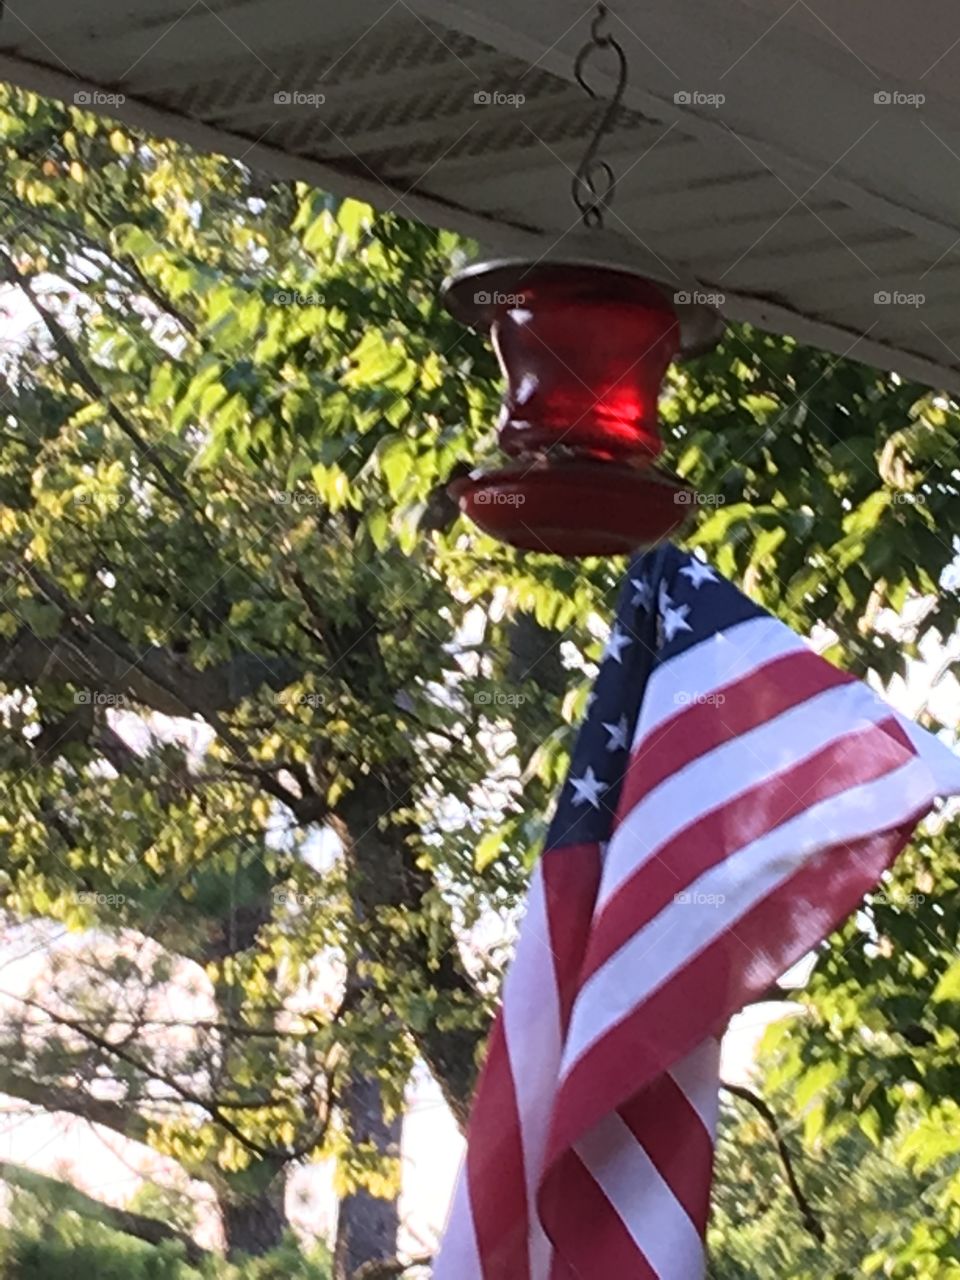 Happy Labor Day weekend everyone! There is a hummingbird in this picture that you can barely see.